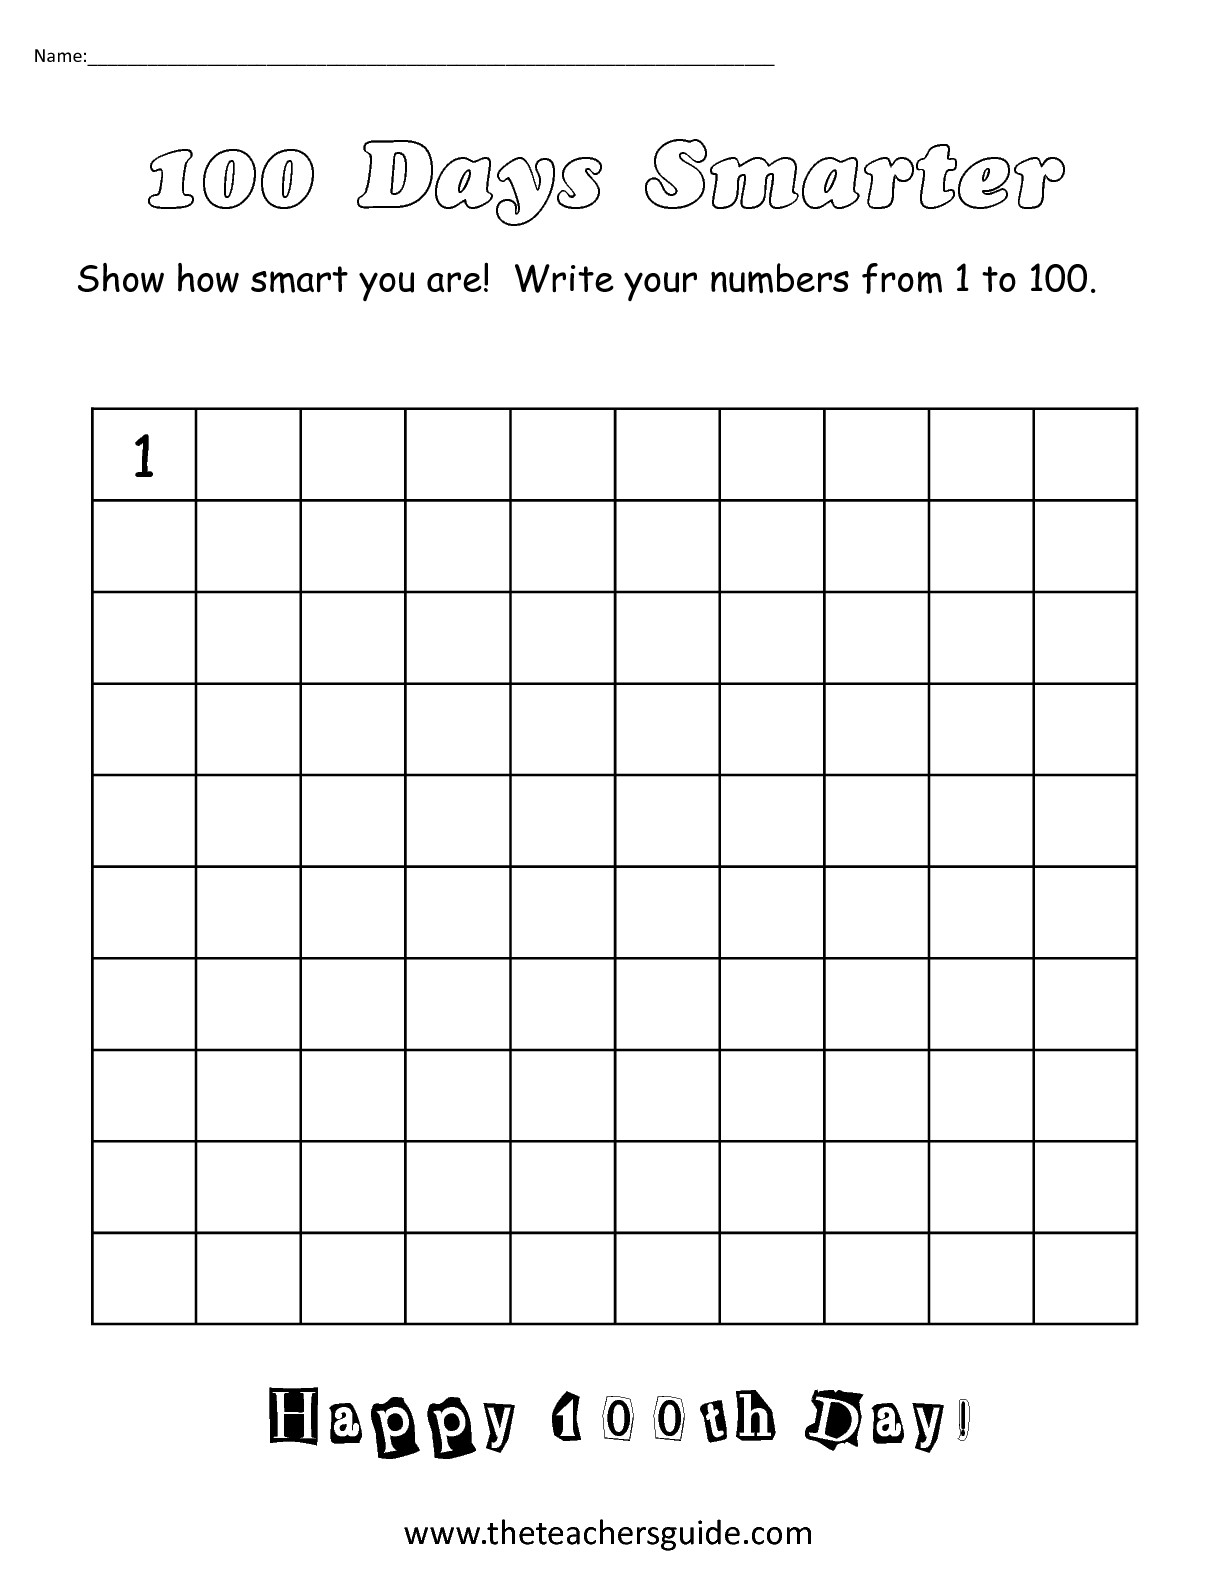 spanish-numbers-worksheets-by-shropshire14-teaching-resources-tes